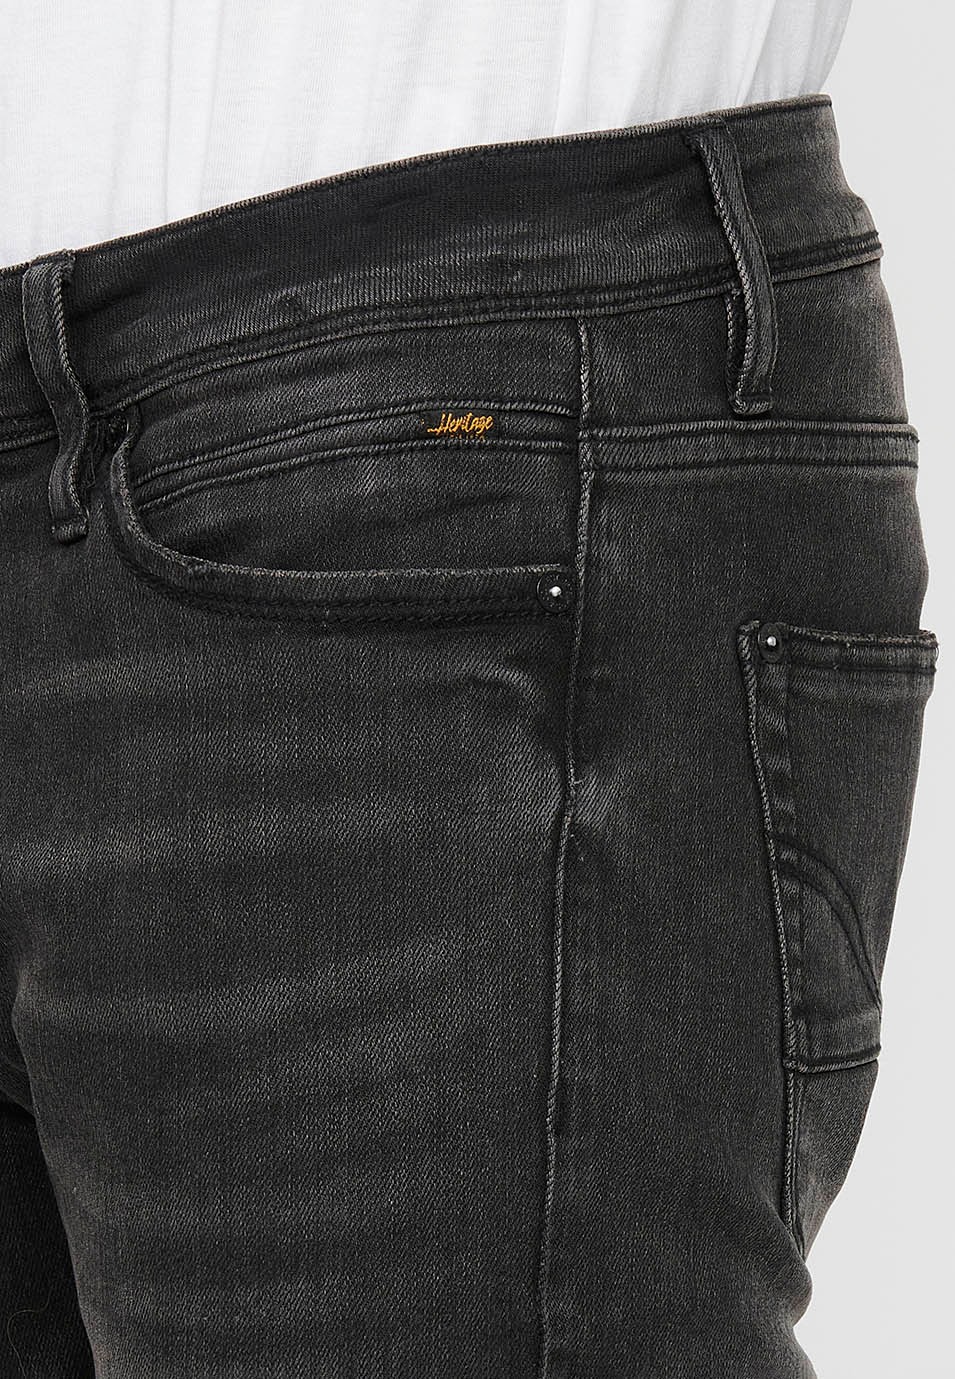 Regular fit long straight jeans with zipper and button front closure in Black Denim for Men 6